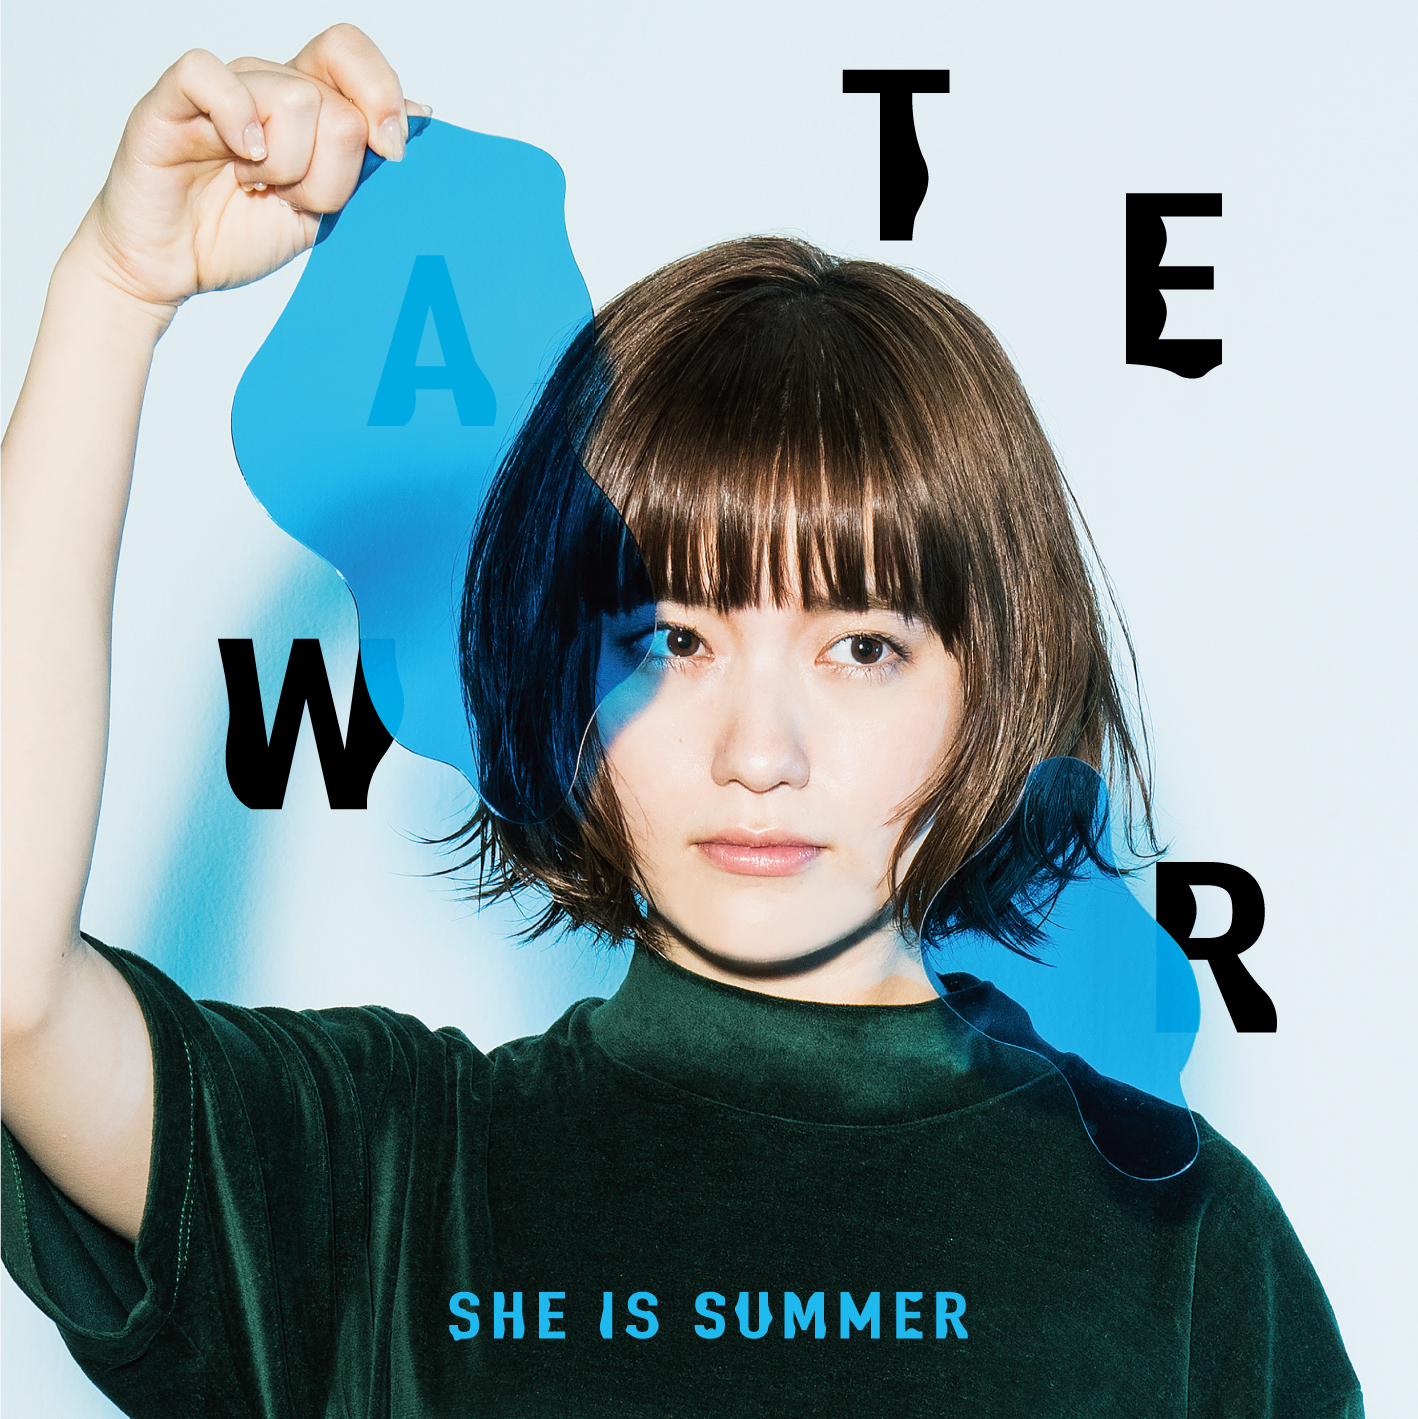 20171118.1518.06 She is Summer - Water (FLAC) cover.jpg